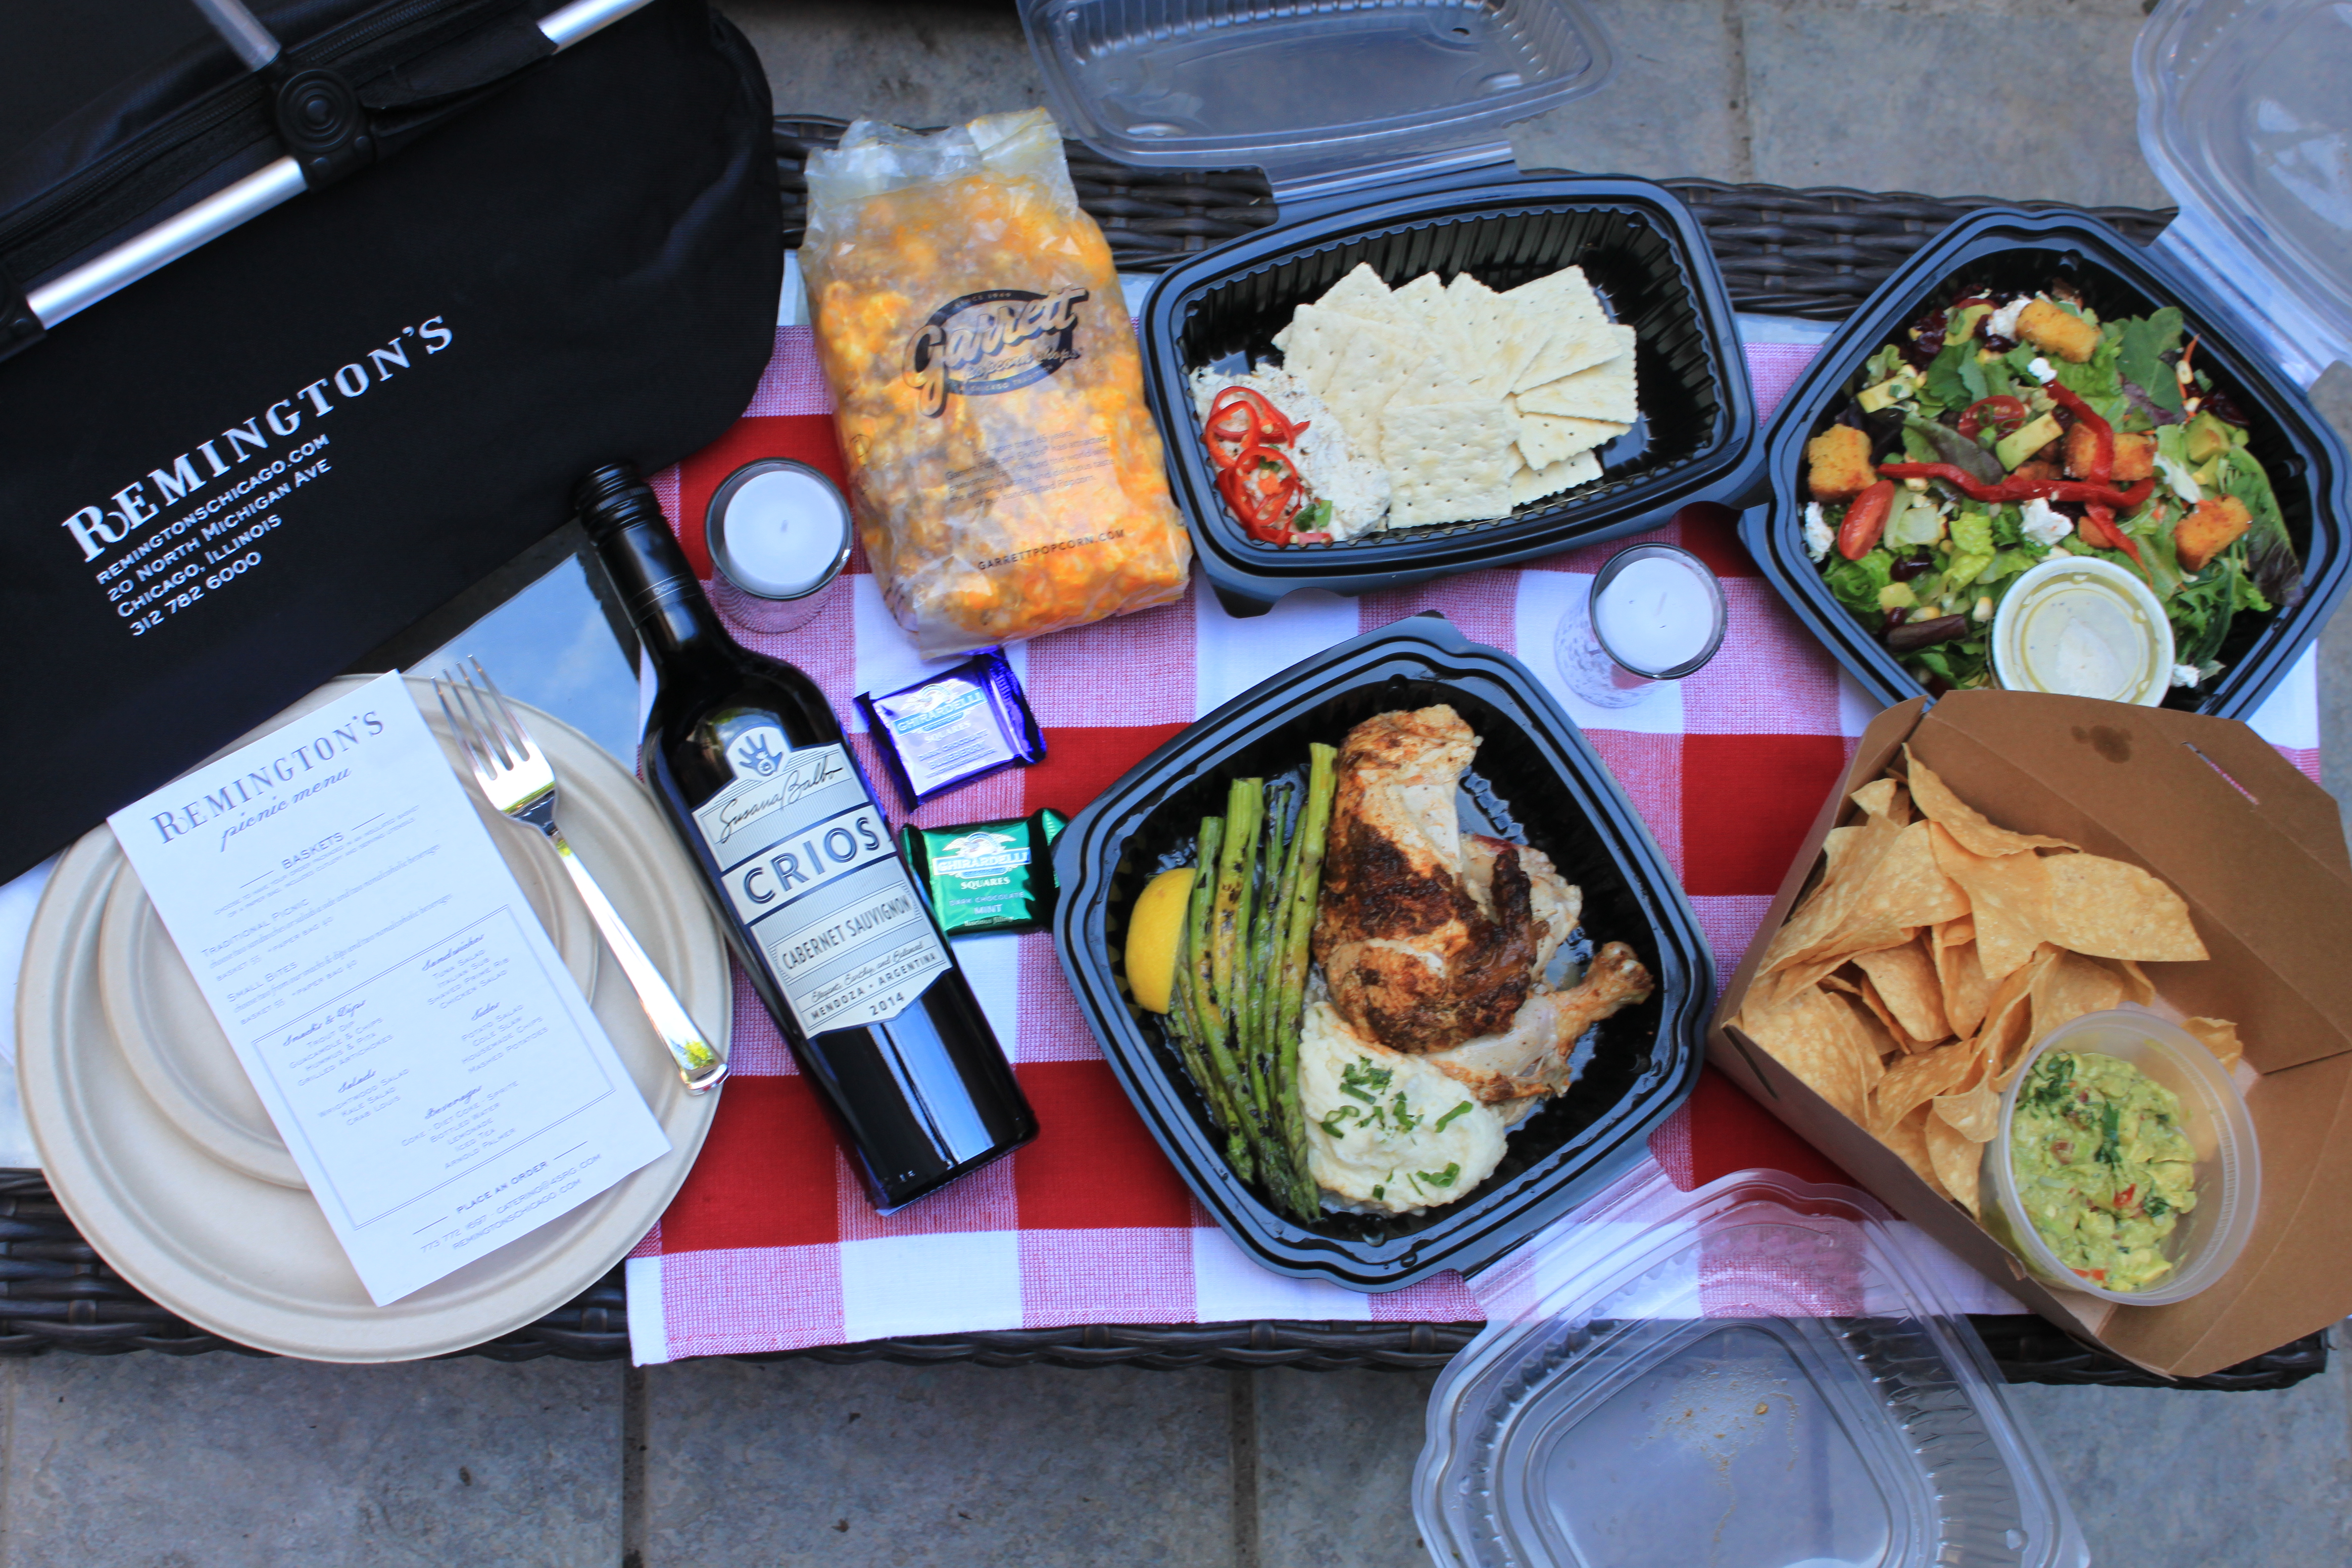 Picnic basket from Remington's Chicago is perfect for concerts at Millenium Park